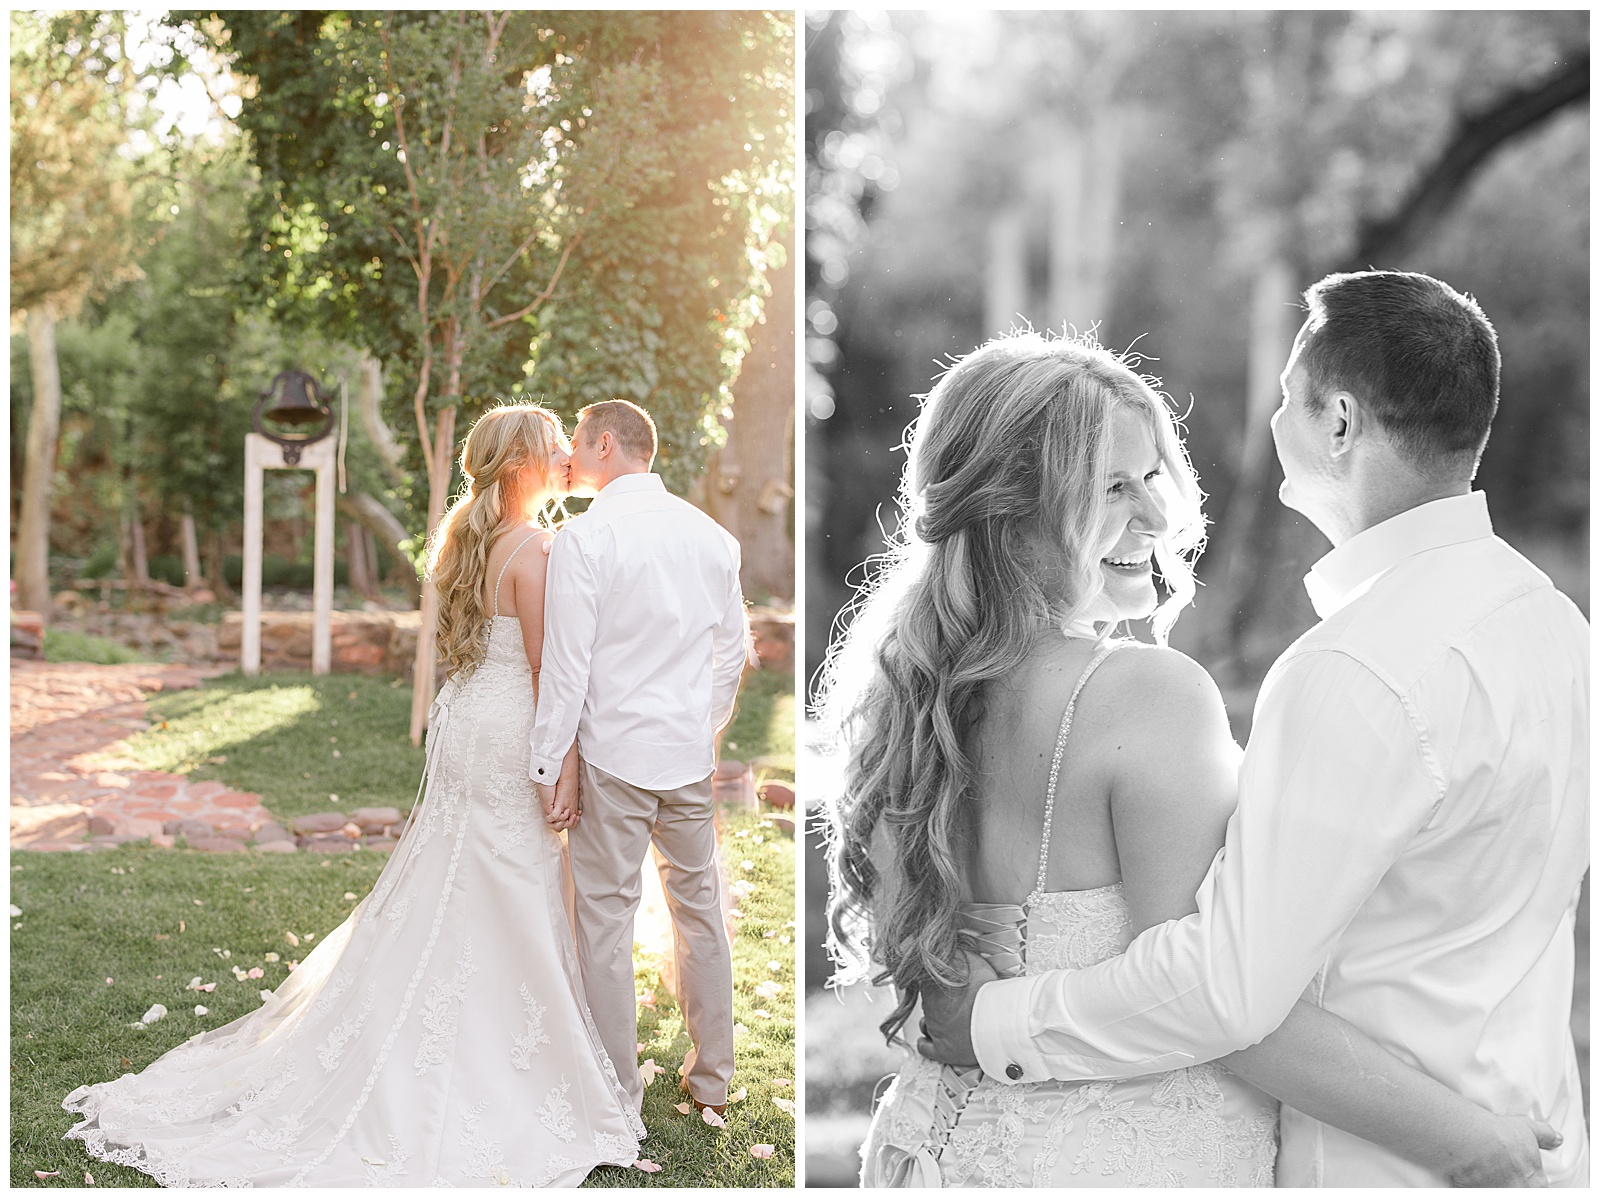 Bride and groom kiss at their intimate wedding